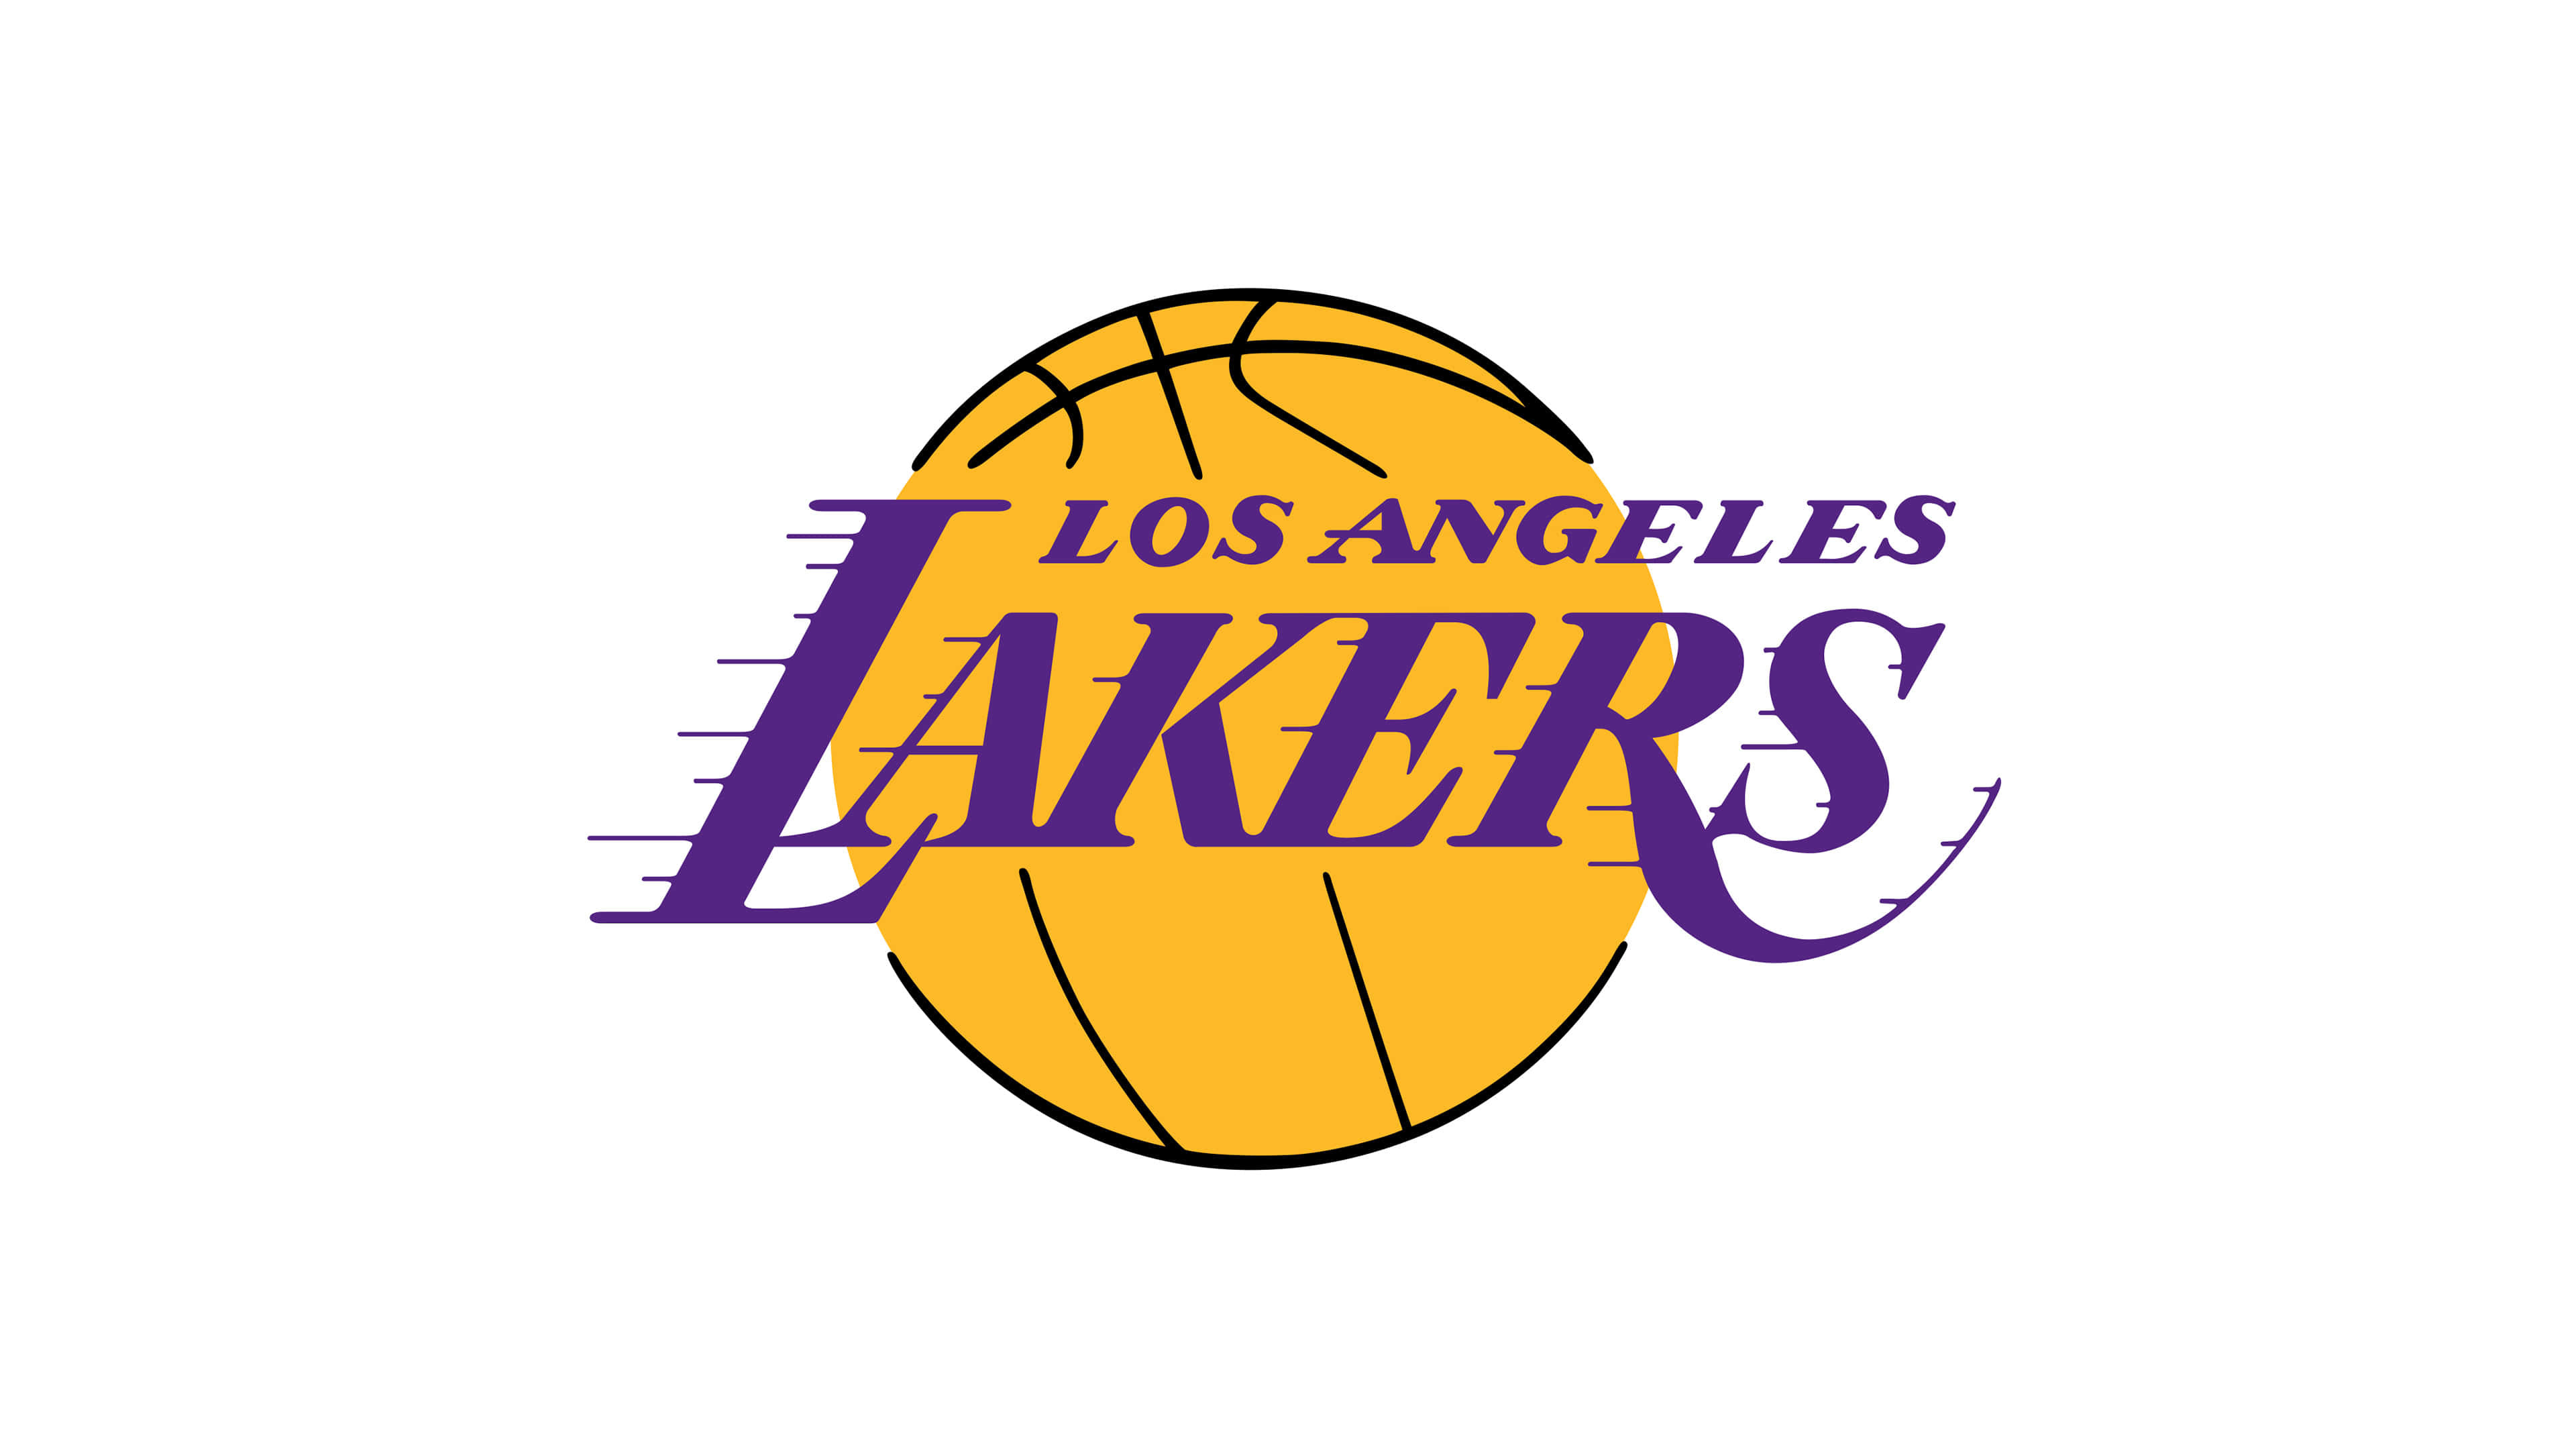 Los Angeles Lakers: The team play their home games at Crypto.com Arena, NBA. 3840x2160 4K Background.